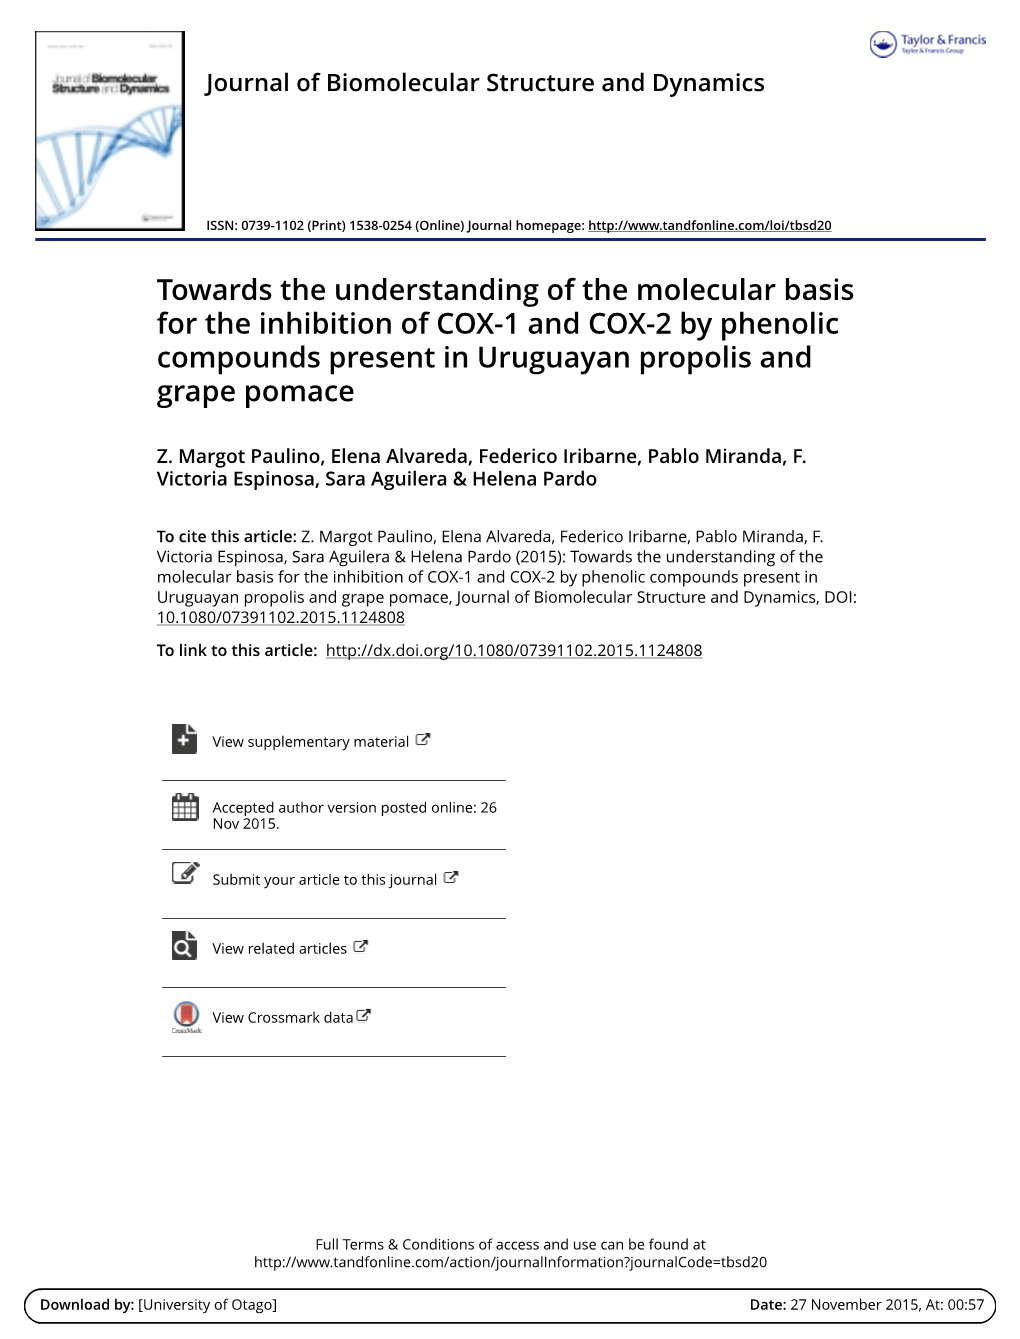 Towards the Understanding of the Molecular Basis for the Inhibition of COX-1 and COX-2 by Phenolic Compounds Present in Uruguayan Propolis and Grape Pomace